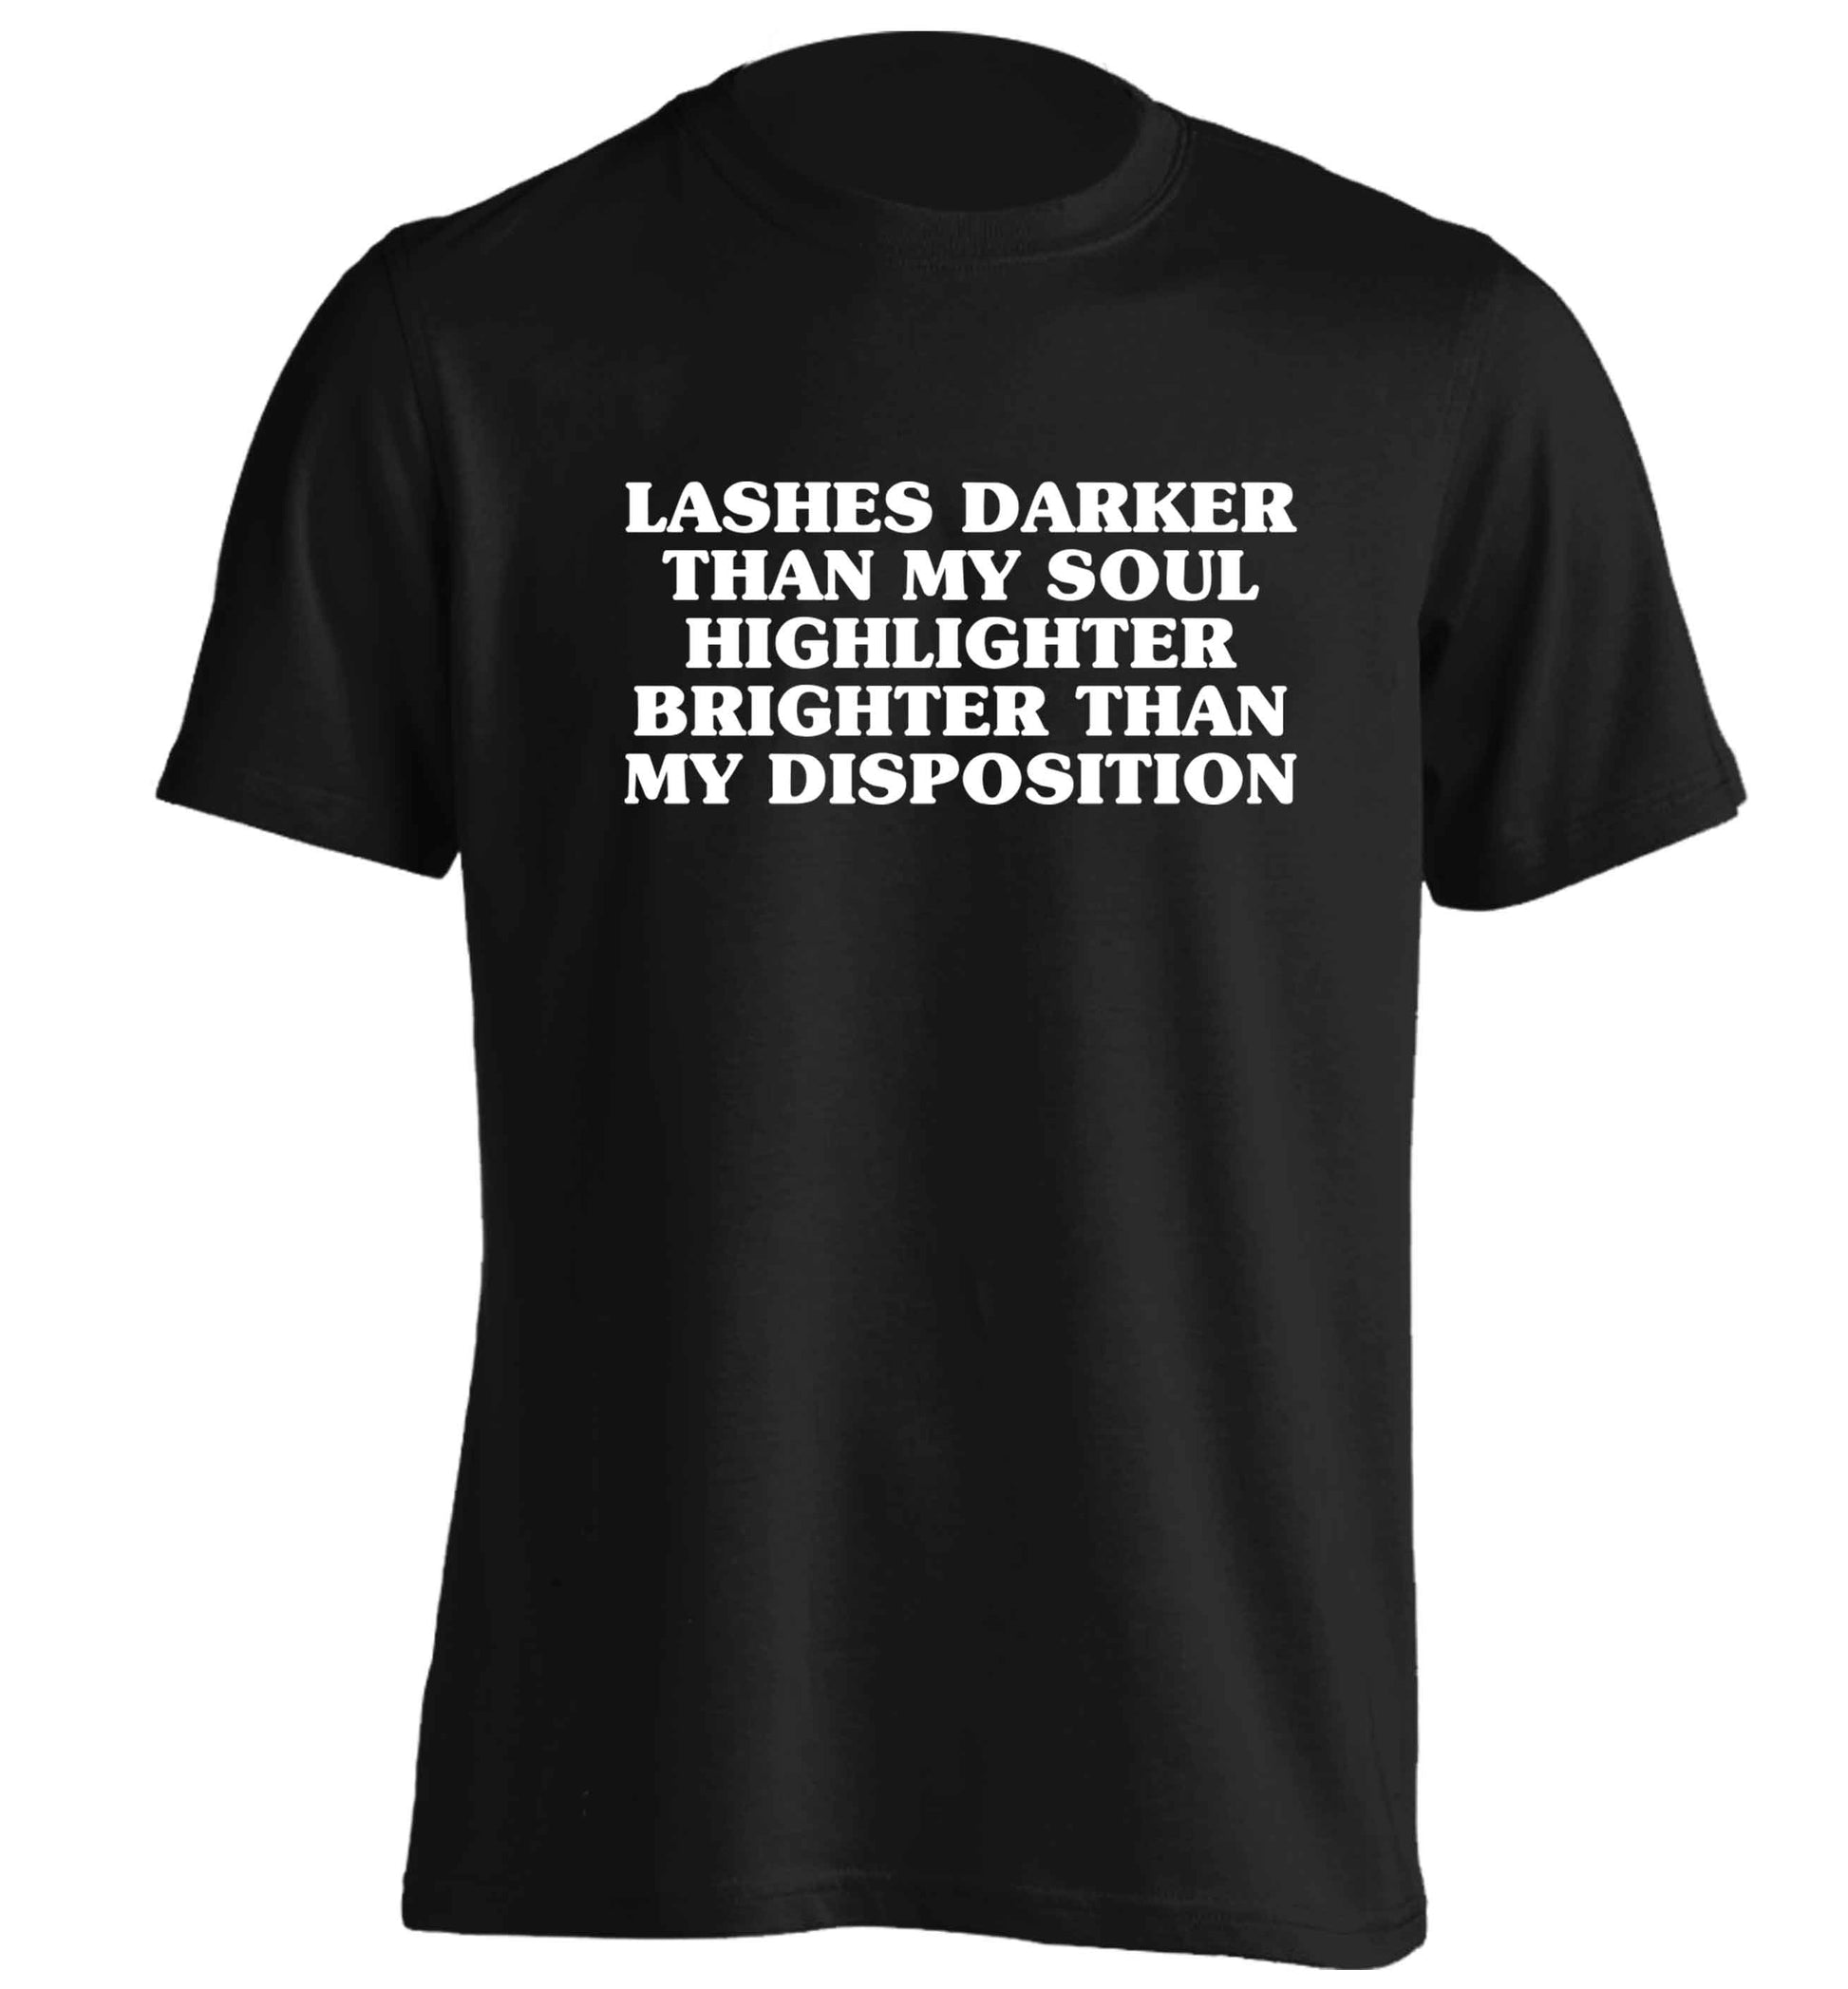 Lashes darker than my soul, highlighter brighter than my disposition adults unisex black Tshirt 2XL